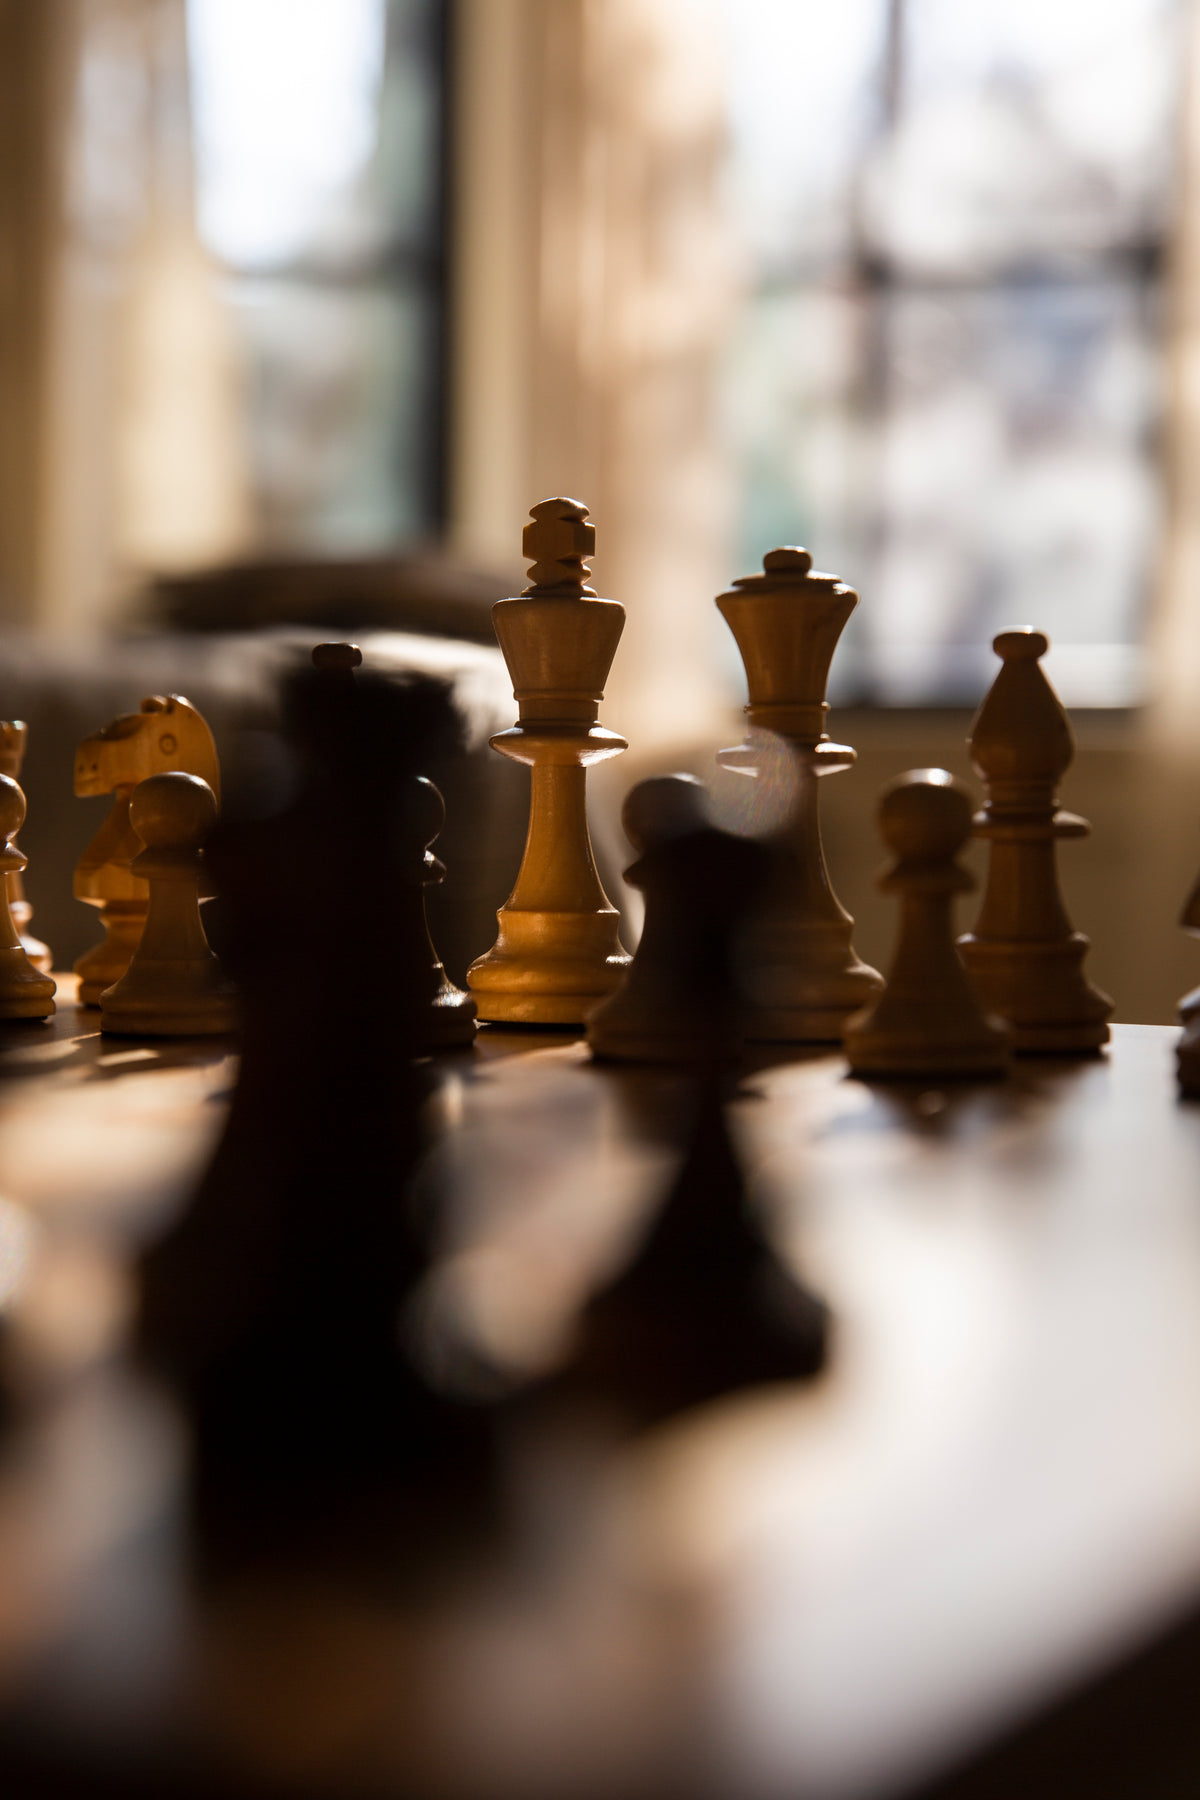 chess pieces in focus on a wooden chess board